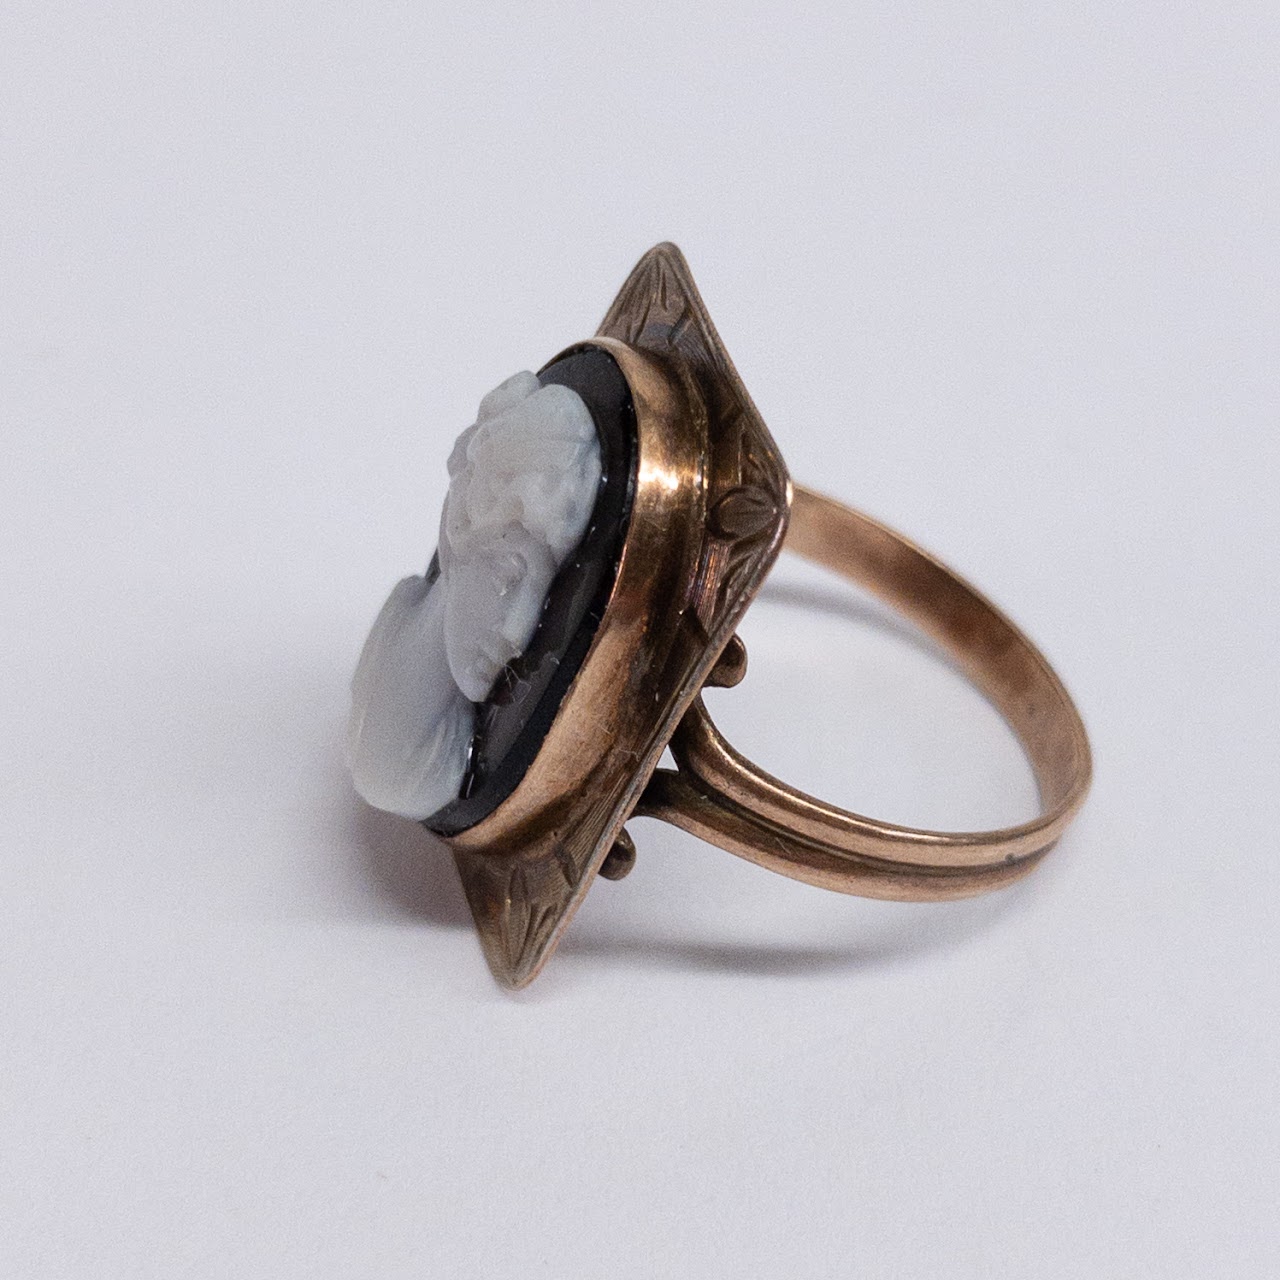 10K Gold Onyx Cameo Ring